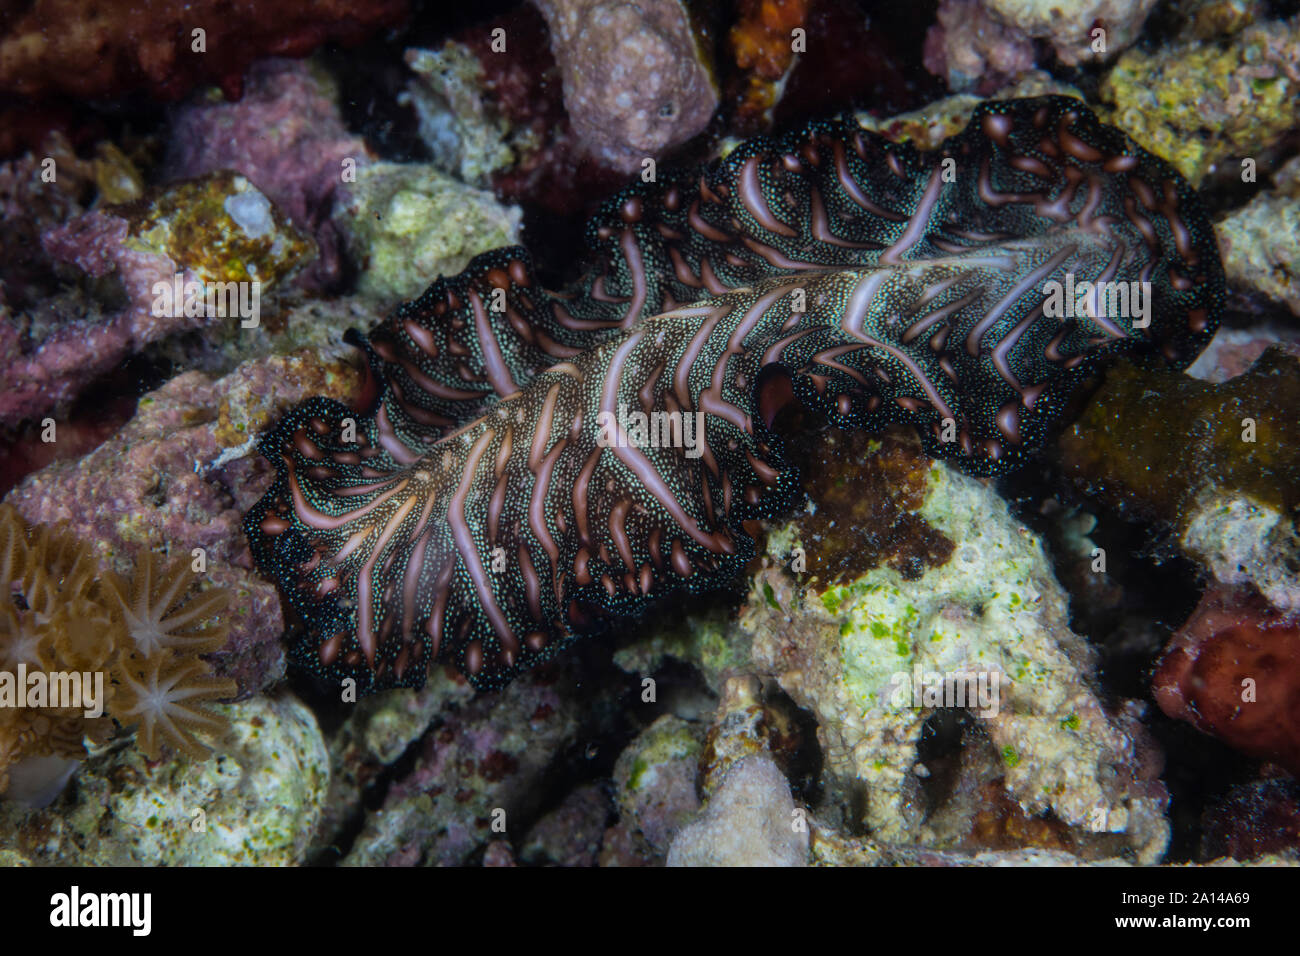 A Persian carpet flatworm swims over a reef at night in Komodo National Park, Indonesia. Stock Photo